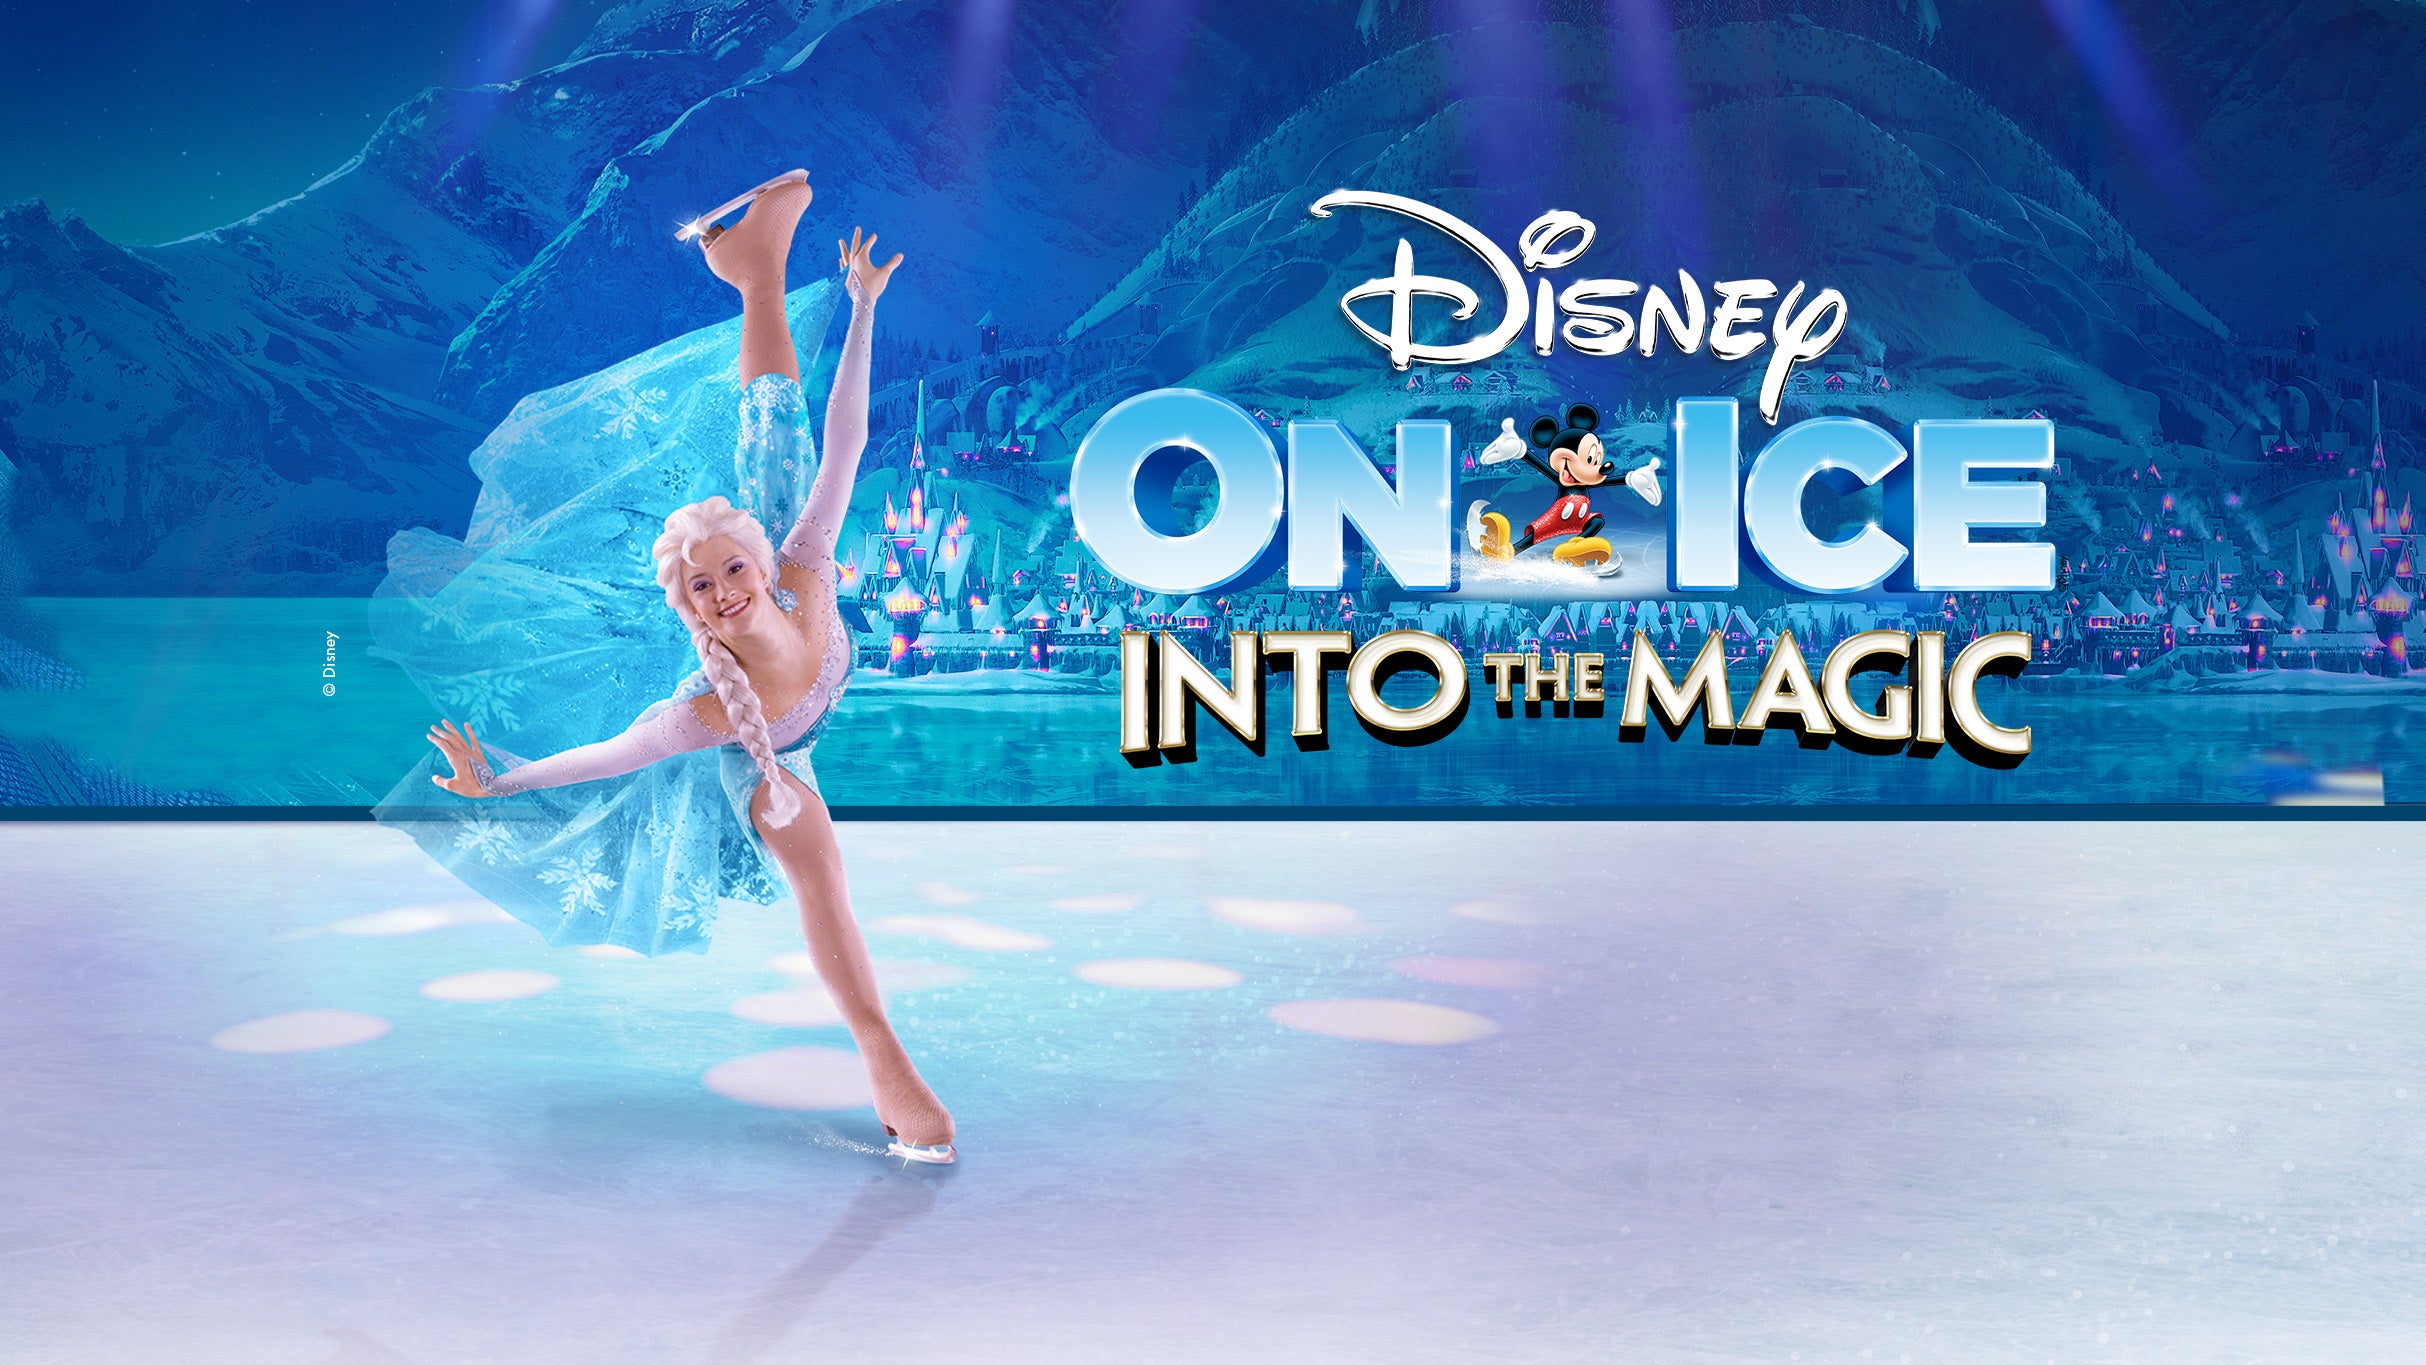 Disney On Ice presents Into the Magic in Saginaw promo photo for Ticketmaster / Venue presale offer code